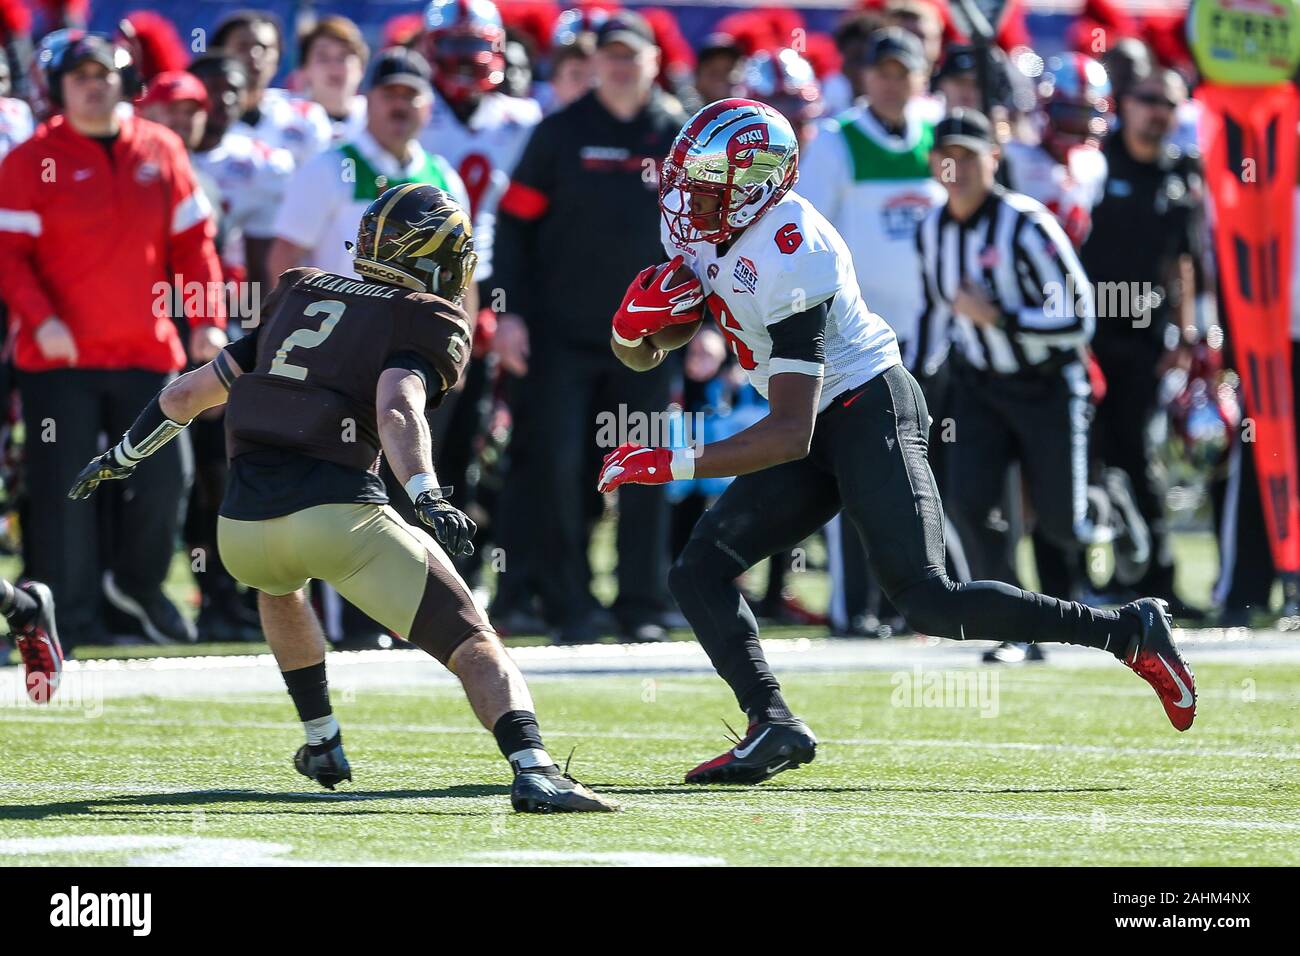 Dallas, Texas, USA. 30th Dec, 2019. Western Kentucky Hilltoppers tight end Joshua Simon (6) in action during the Servpro First Responder Bowl game between Western Michigan Broncos and the Western Kentucky Hilltoppers at the gerald Ford Stadiuml Stadium in Dallas, Texas. Credit: Dan Wozniak/ZUMA Wire/Alamy Live News Stock Photo